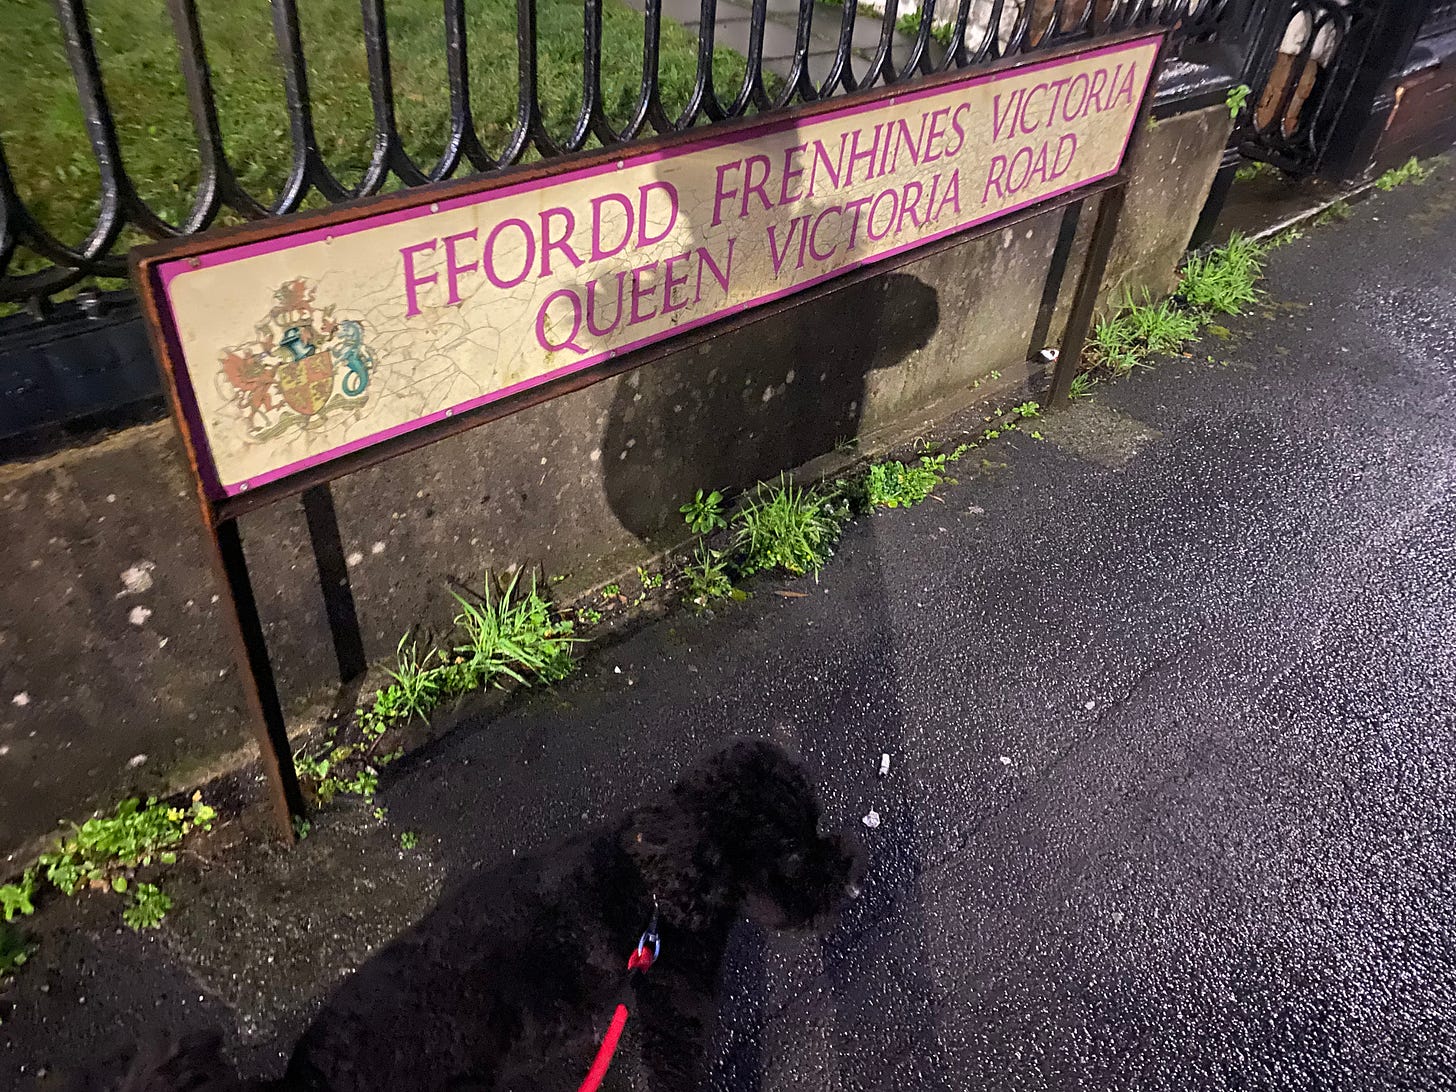 A street sign at the edge of a pavement, with two lines, the first reading 'ffordd Frenhines Victoria' and blelow that, 'Queen Victoria Road'. My dog Jessie, a black cockapoo can be seen at the bottom of the shot.